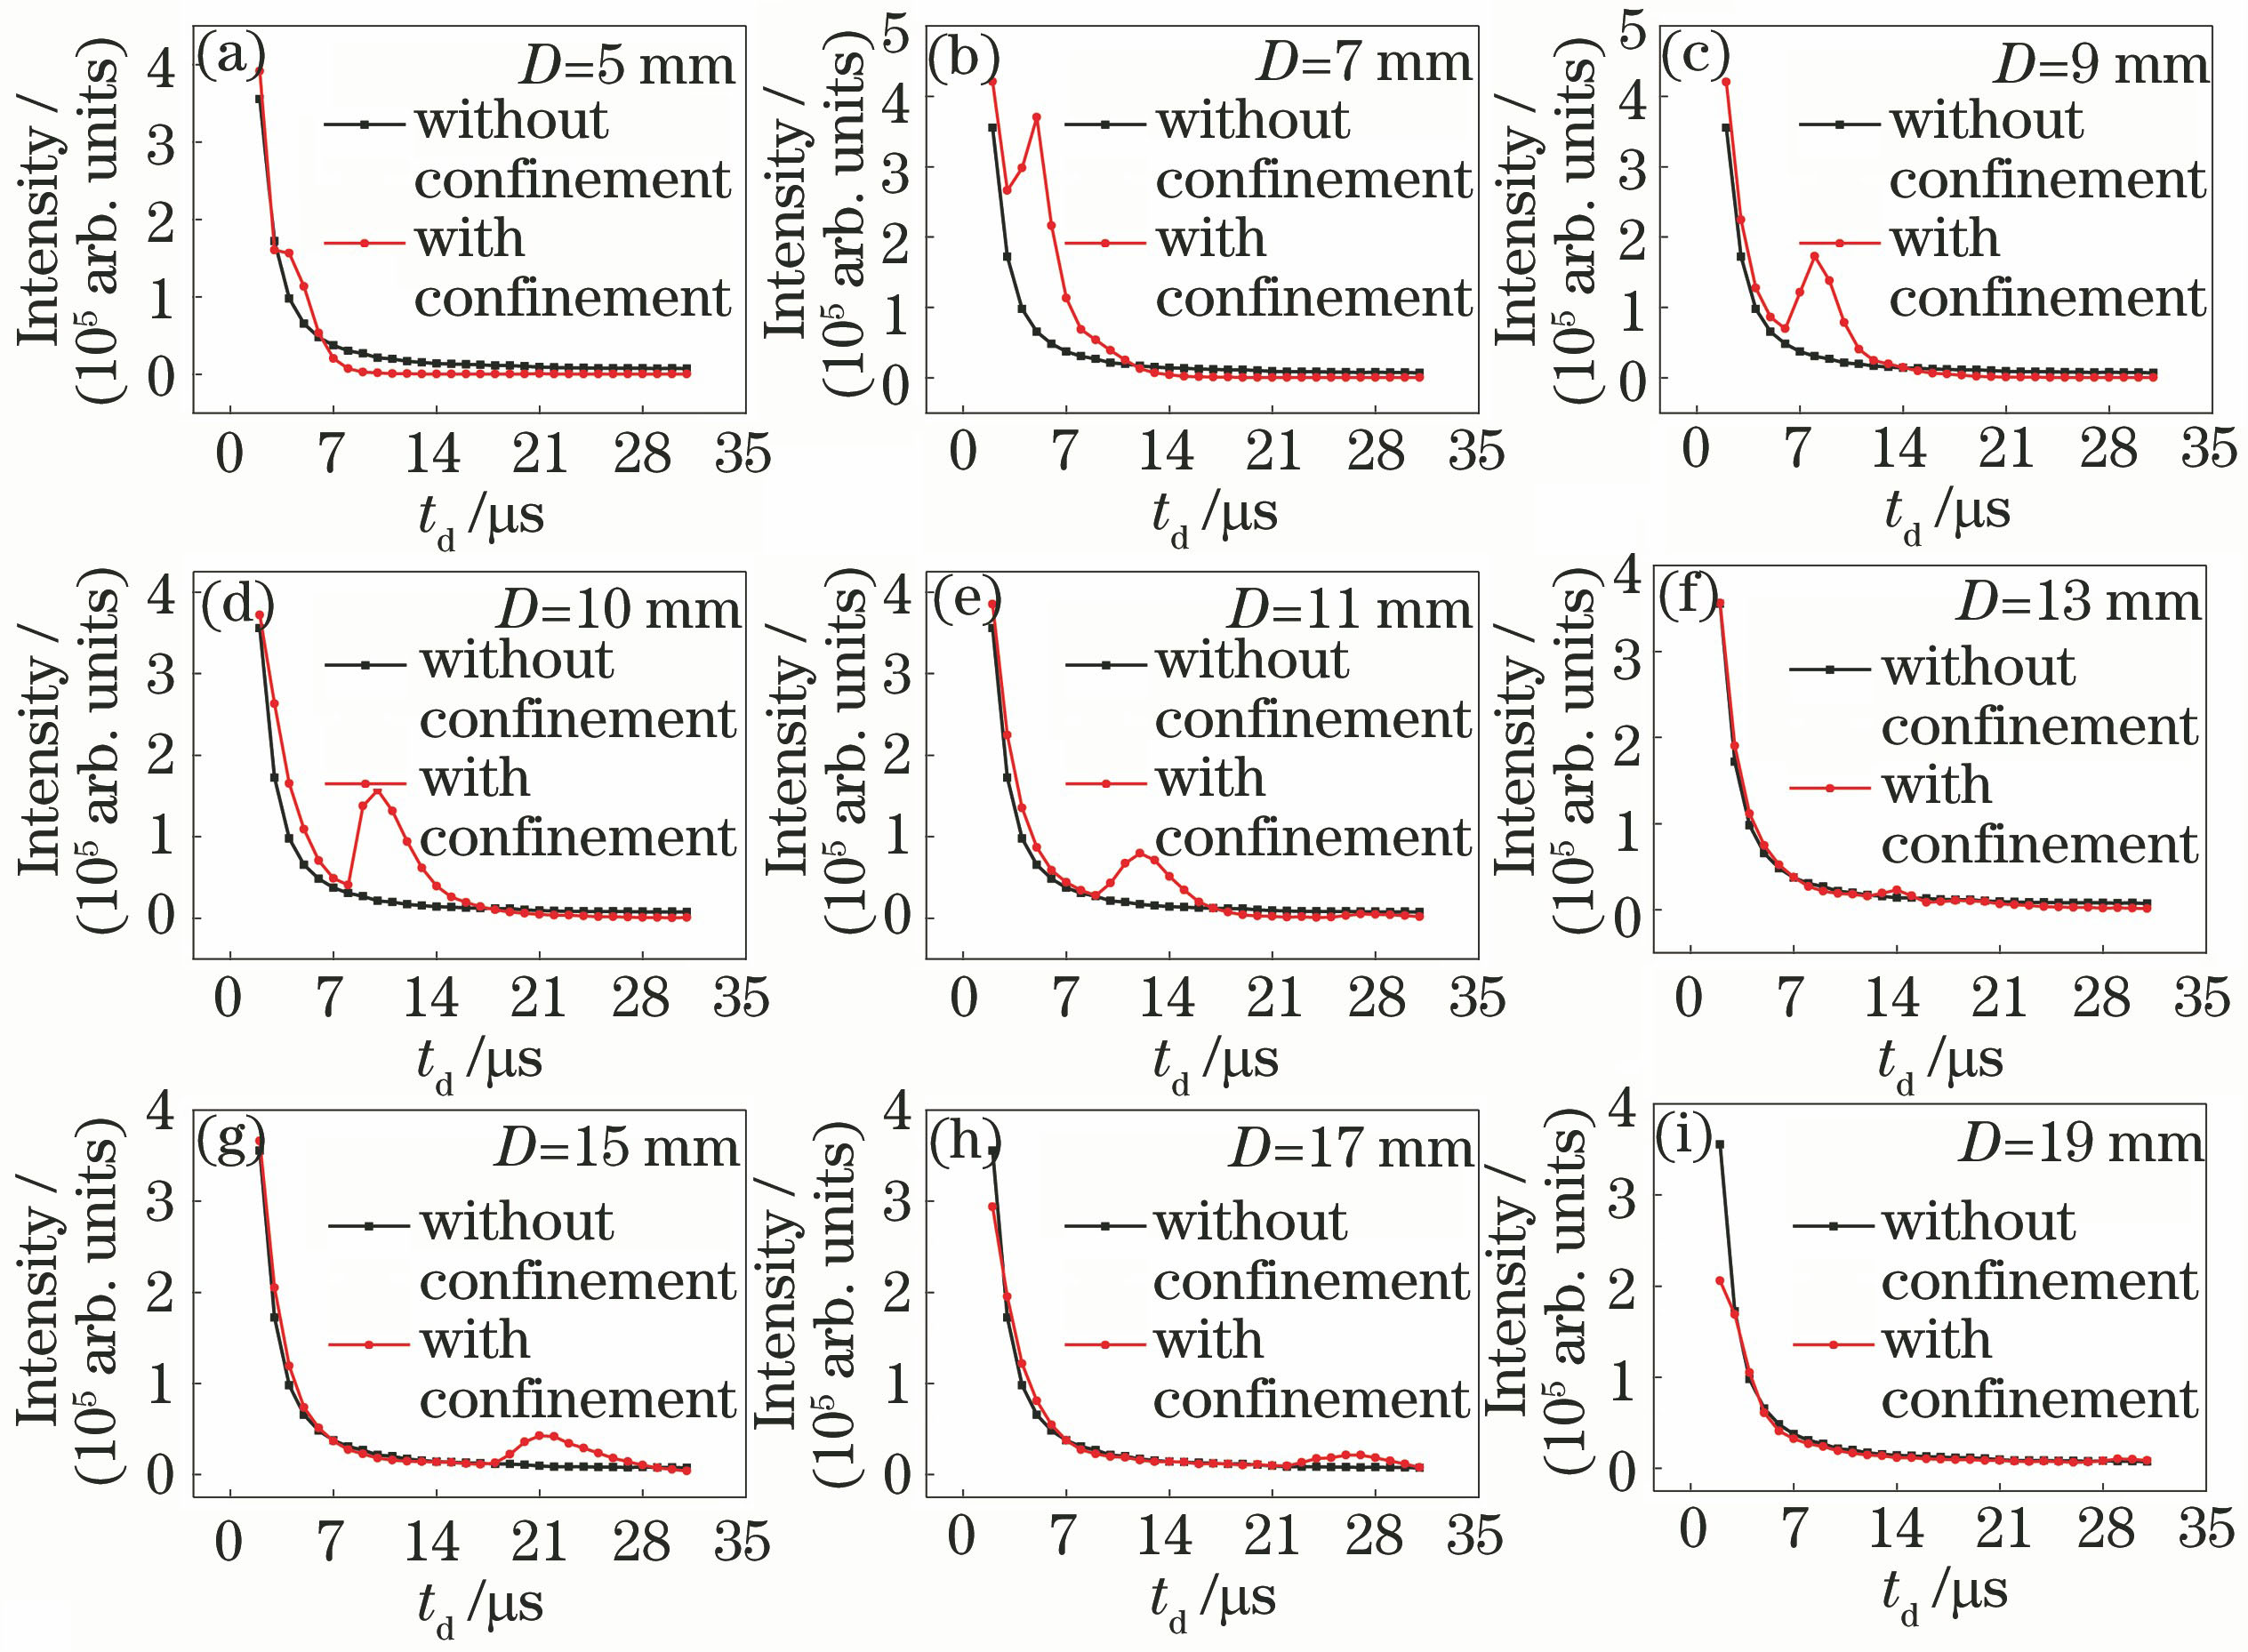 Temporal evolution of spectral line intensity of Fe I: 374.57 nm with and without hemispherical cavity confinement. (a) D=5 mm; (b) D=7 mm; (c) D=9 mm; (d) D=10 mm; (e) D=11 mm; (f) D=13 mm; (g) D=15 mm; (h) D=17 mm; (i) D=19 mm